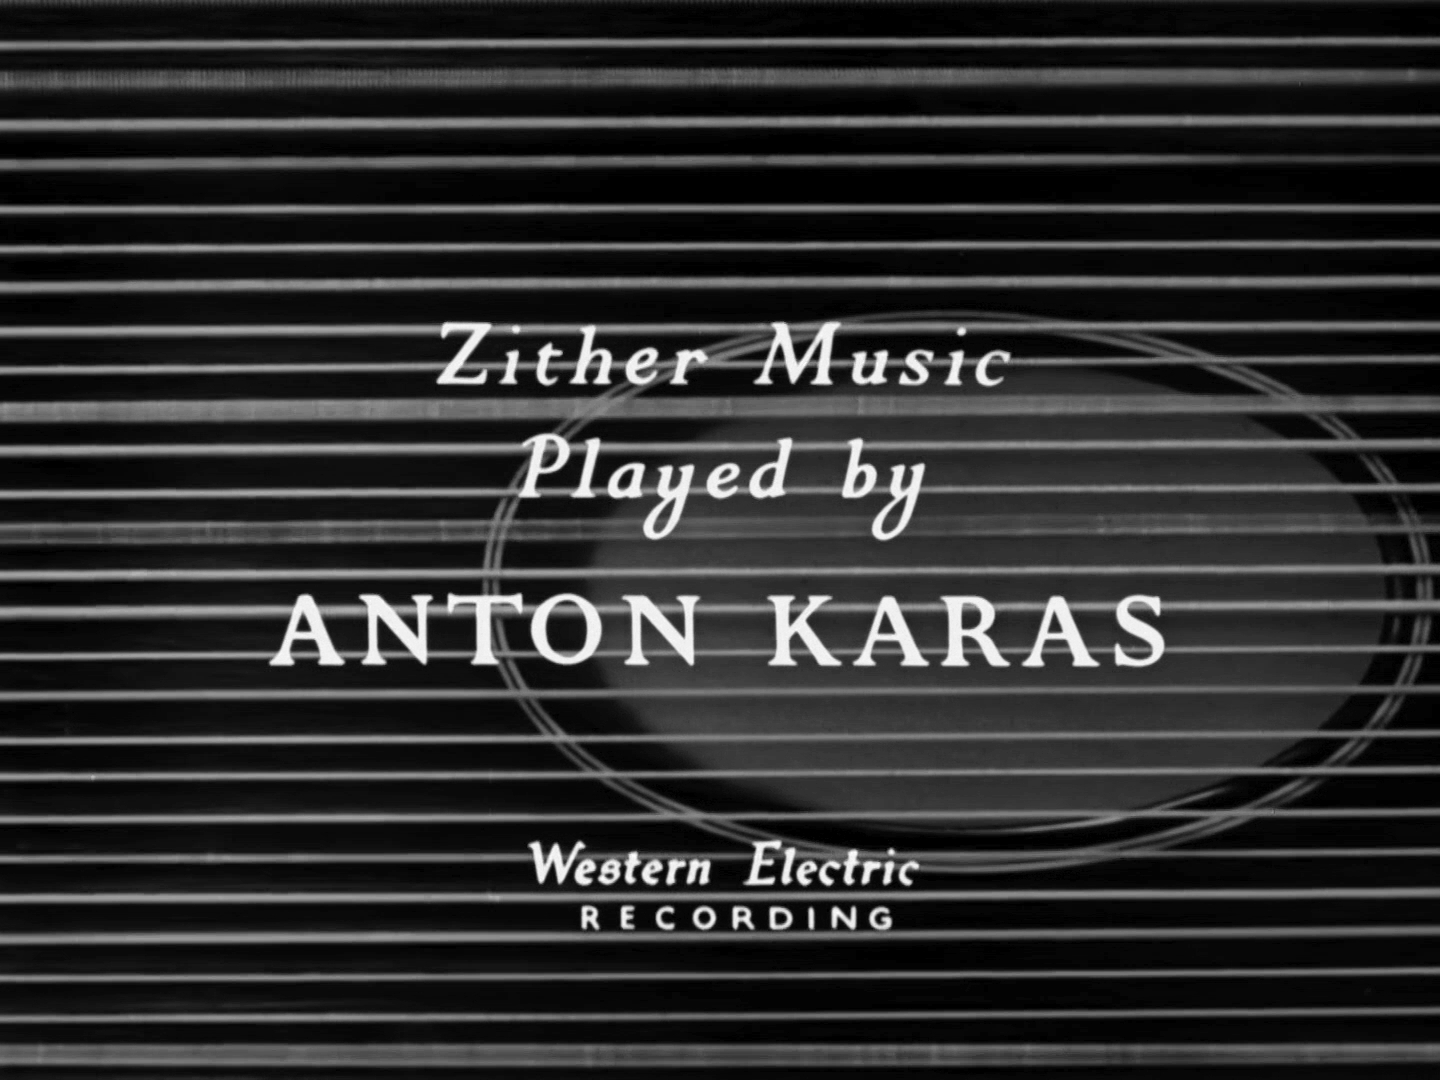 Main title from The Third Man (1949) (9). Zither music played by Anton Karas